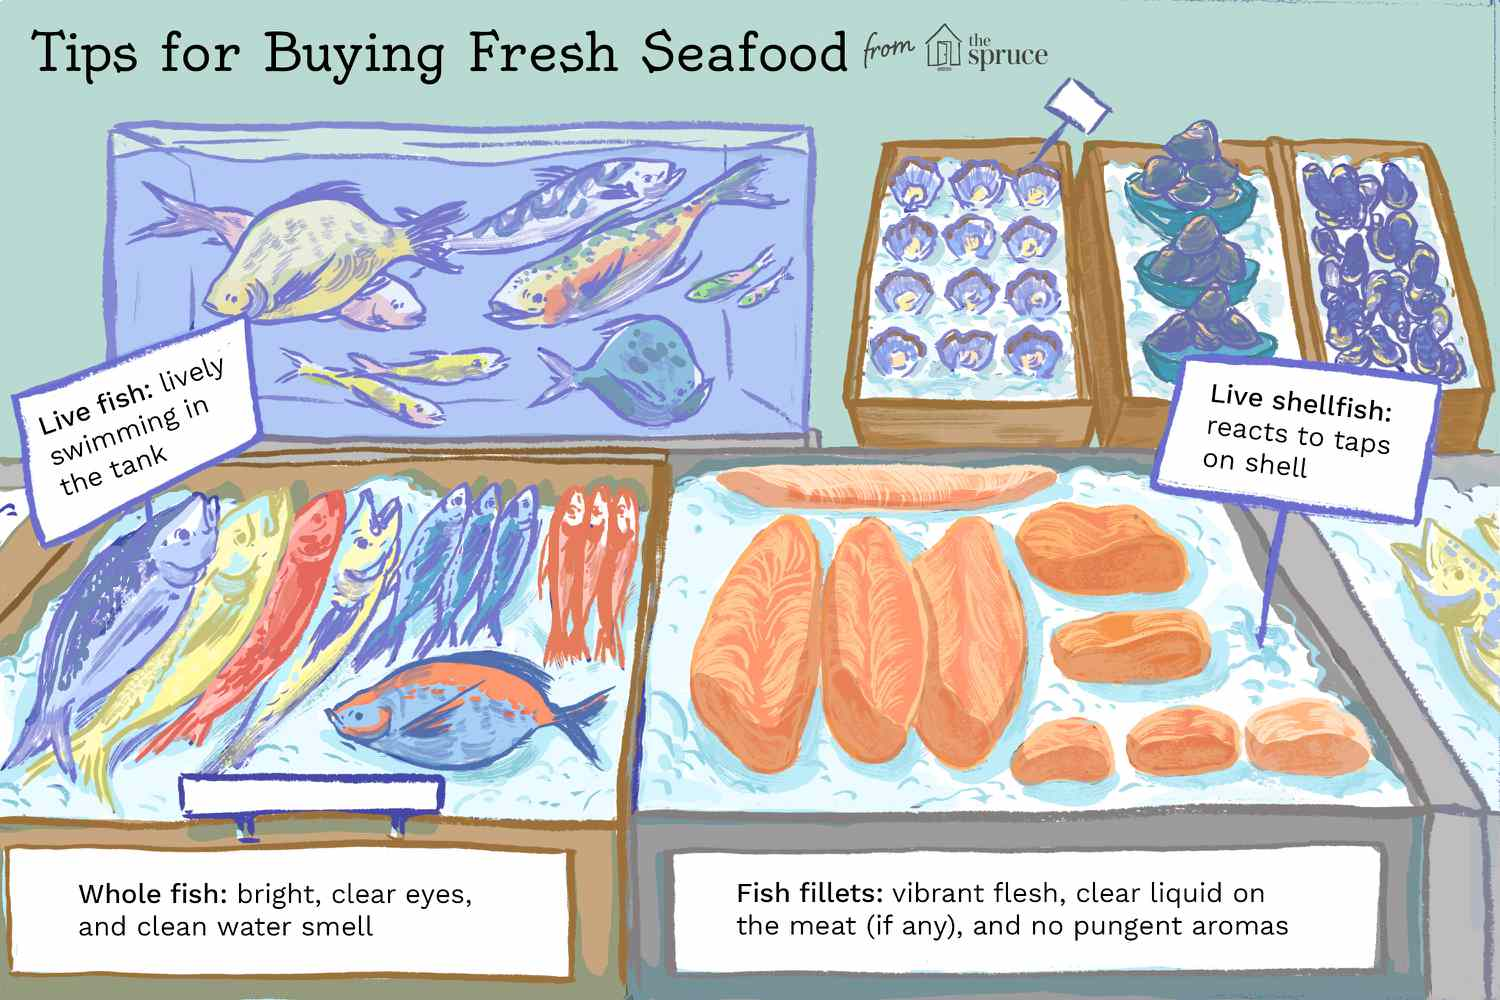 How to Choose Fresh Seafood??